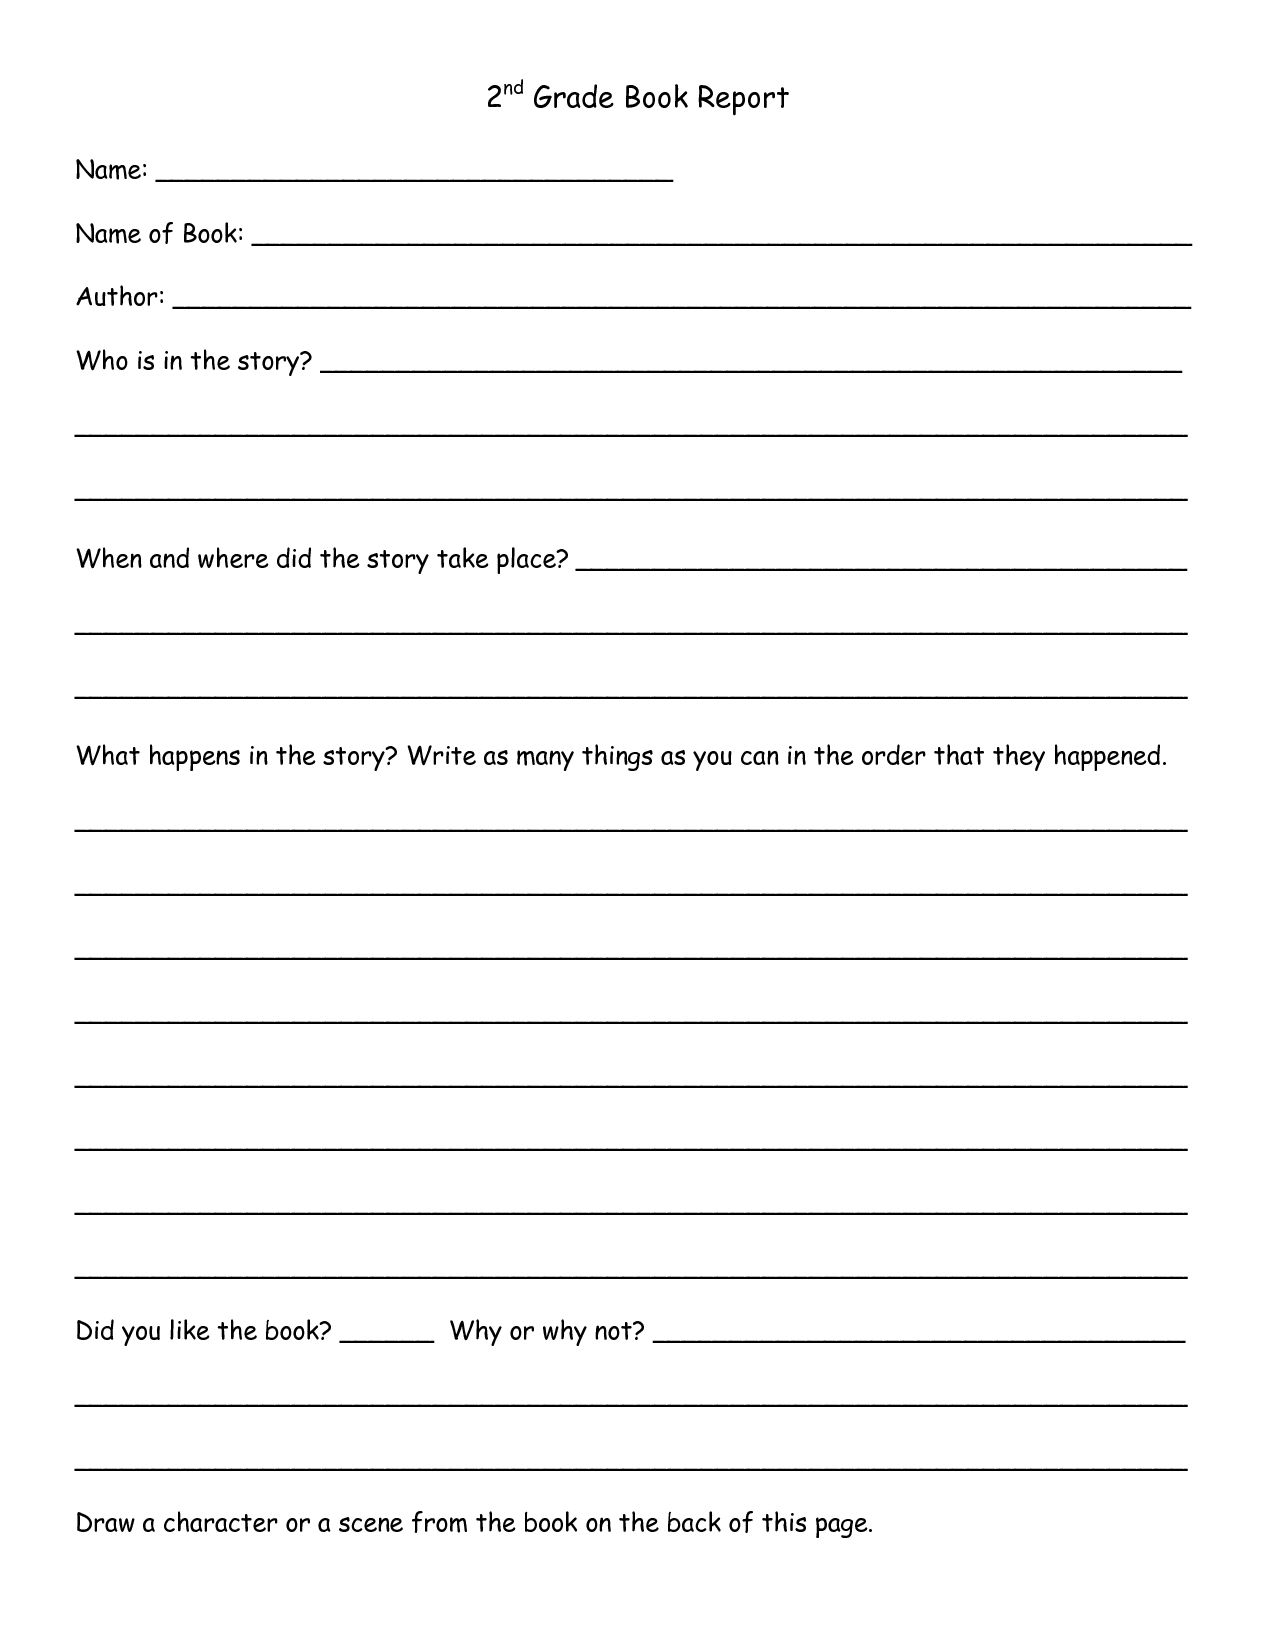 Best Printable Book Report Forms_93317